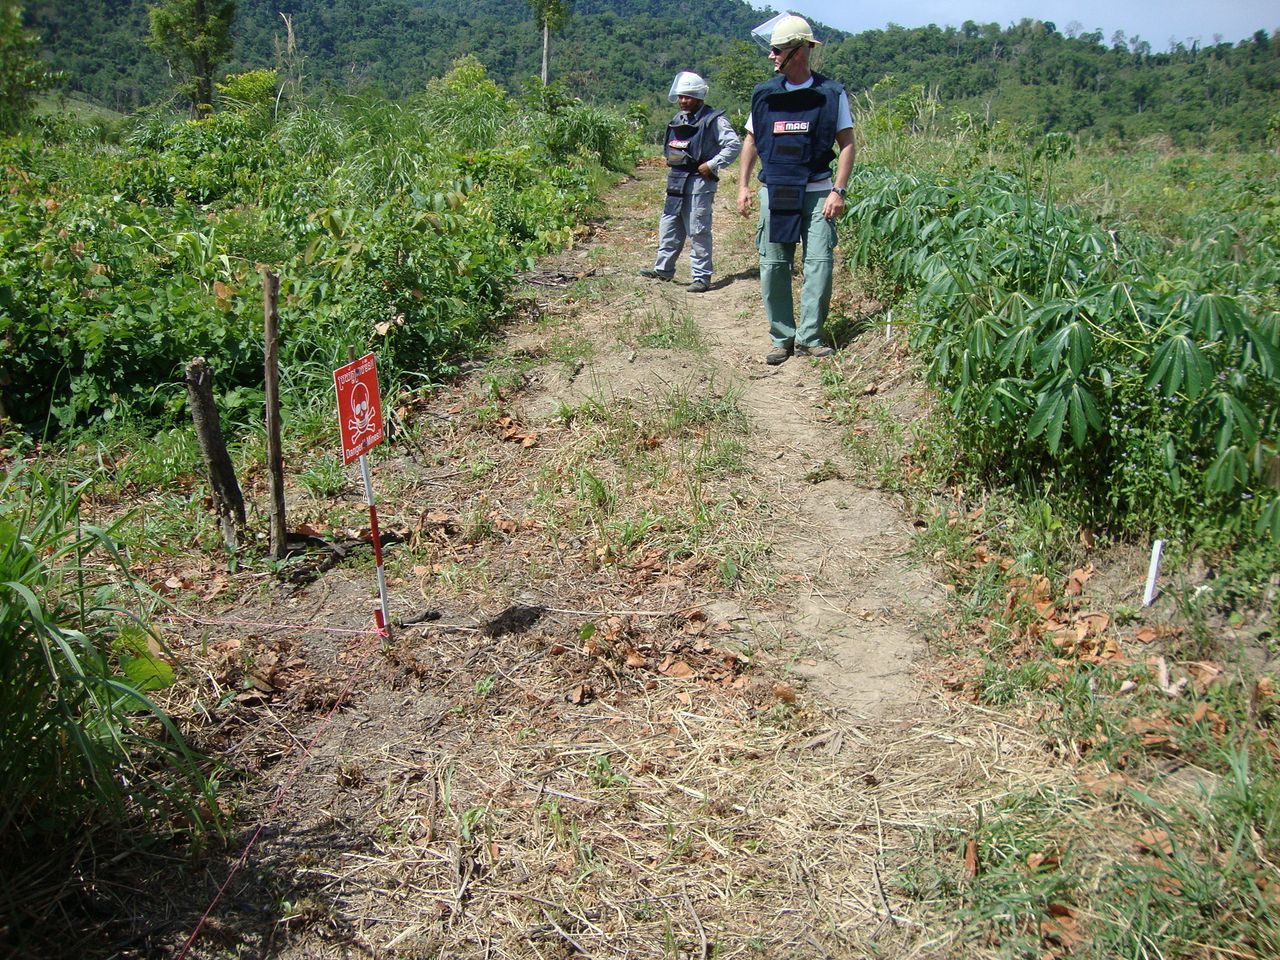 Detective Tony Langer, right, carrying out mine clearance in Battambang, Cambodia.